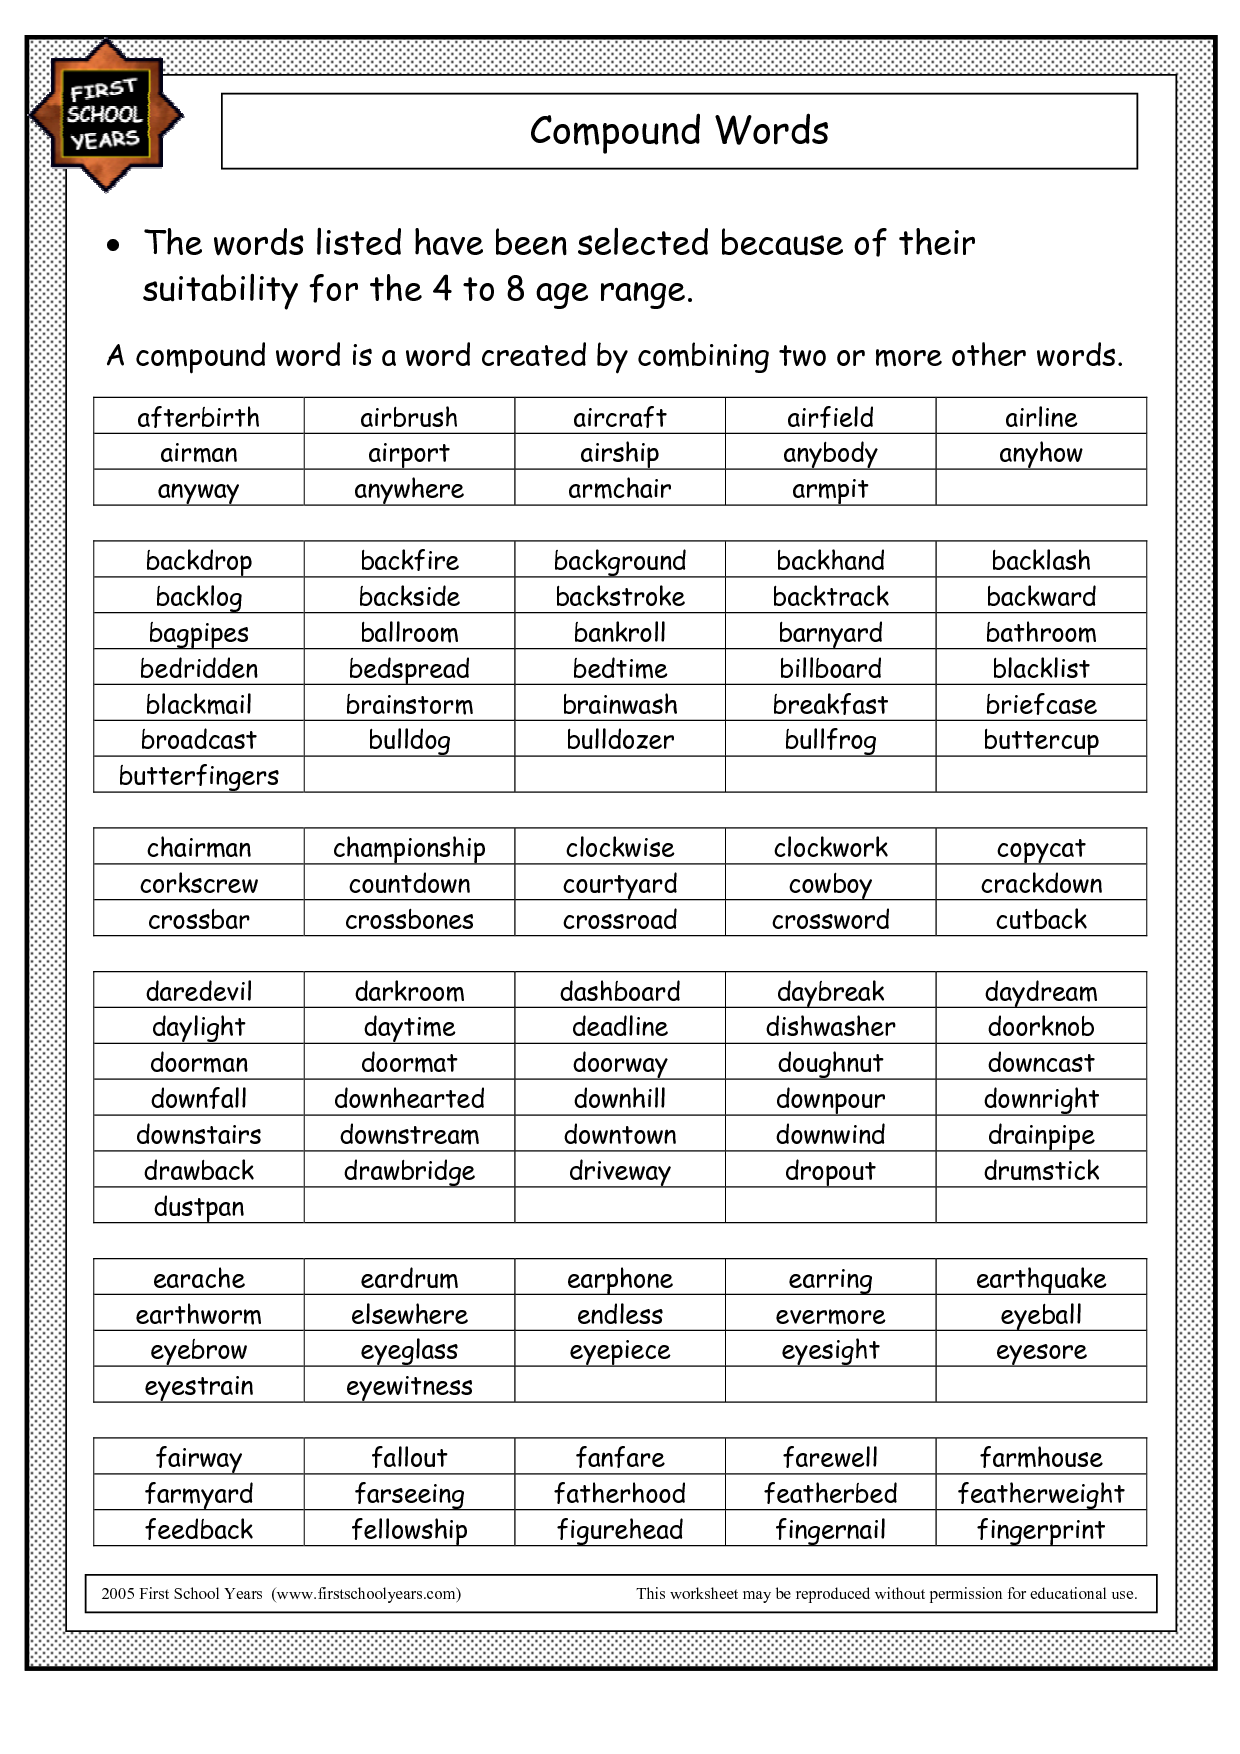 14 Best Images of 3rd Grade Compound Words Worksheets - Compound Words